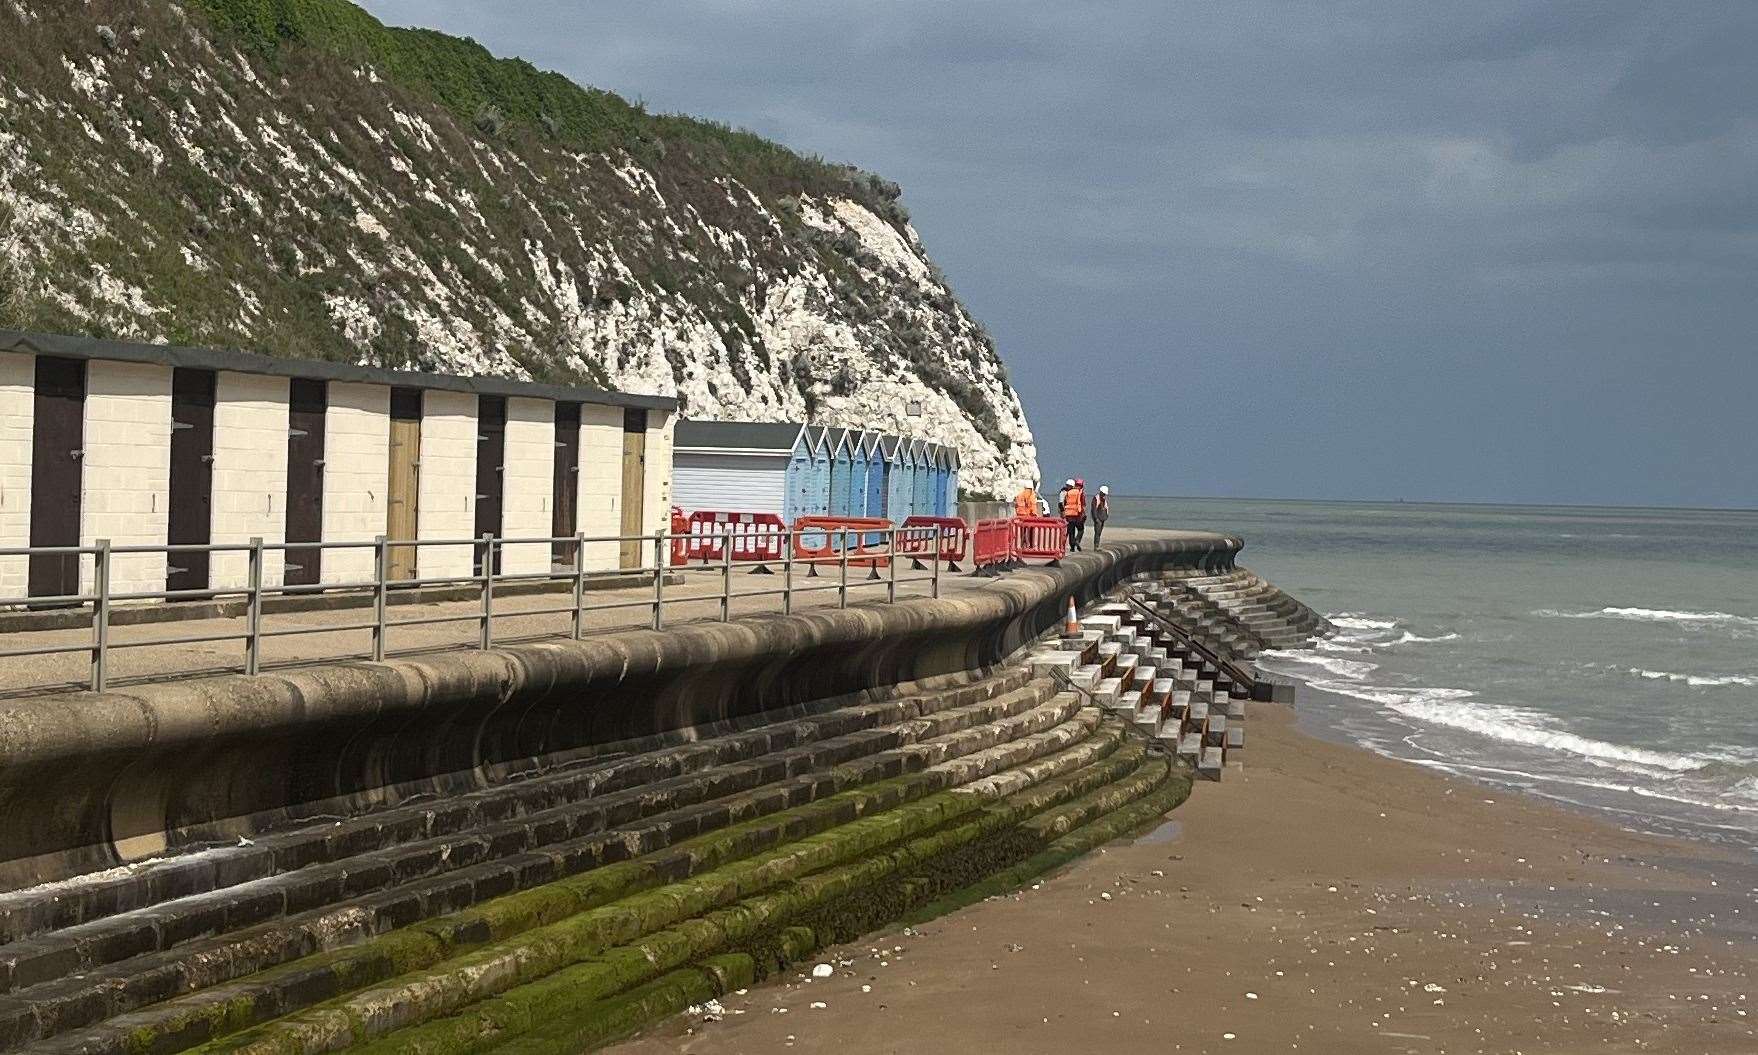 Closures at the Dumpton Gap promenade in Broadstairs are set to take place until July 22